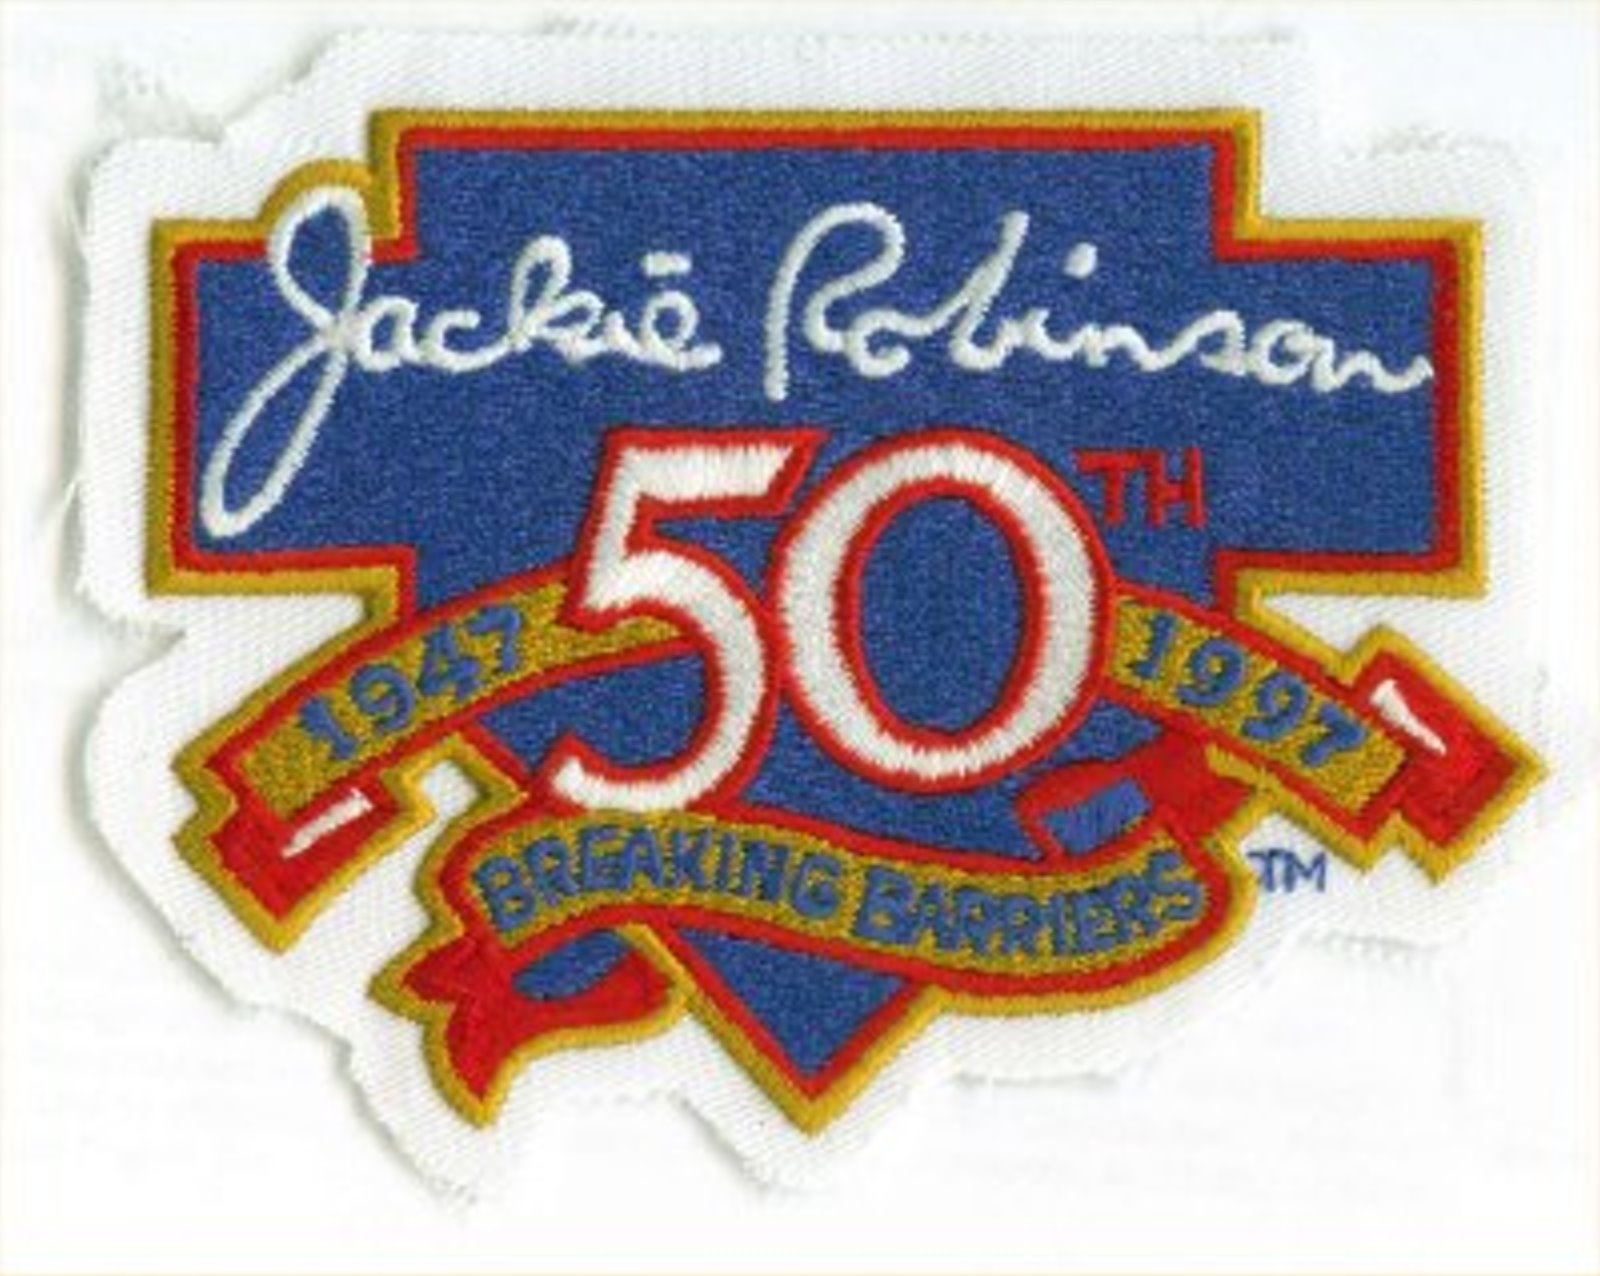 Jackie Robinson 50th Breaking Barriers patch 1947-1997